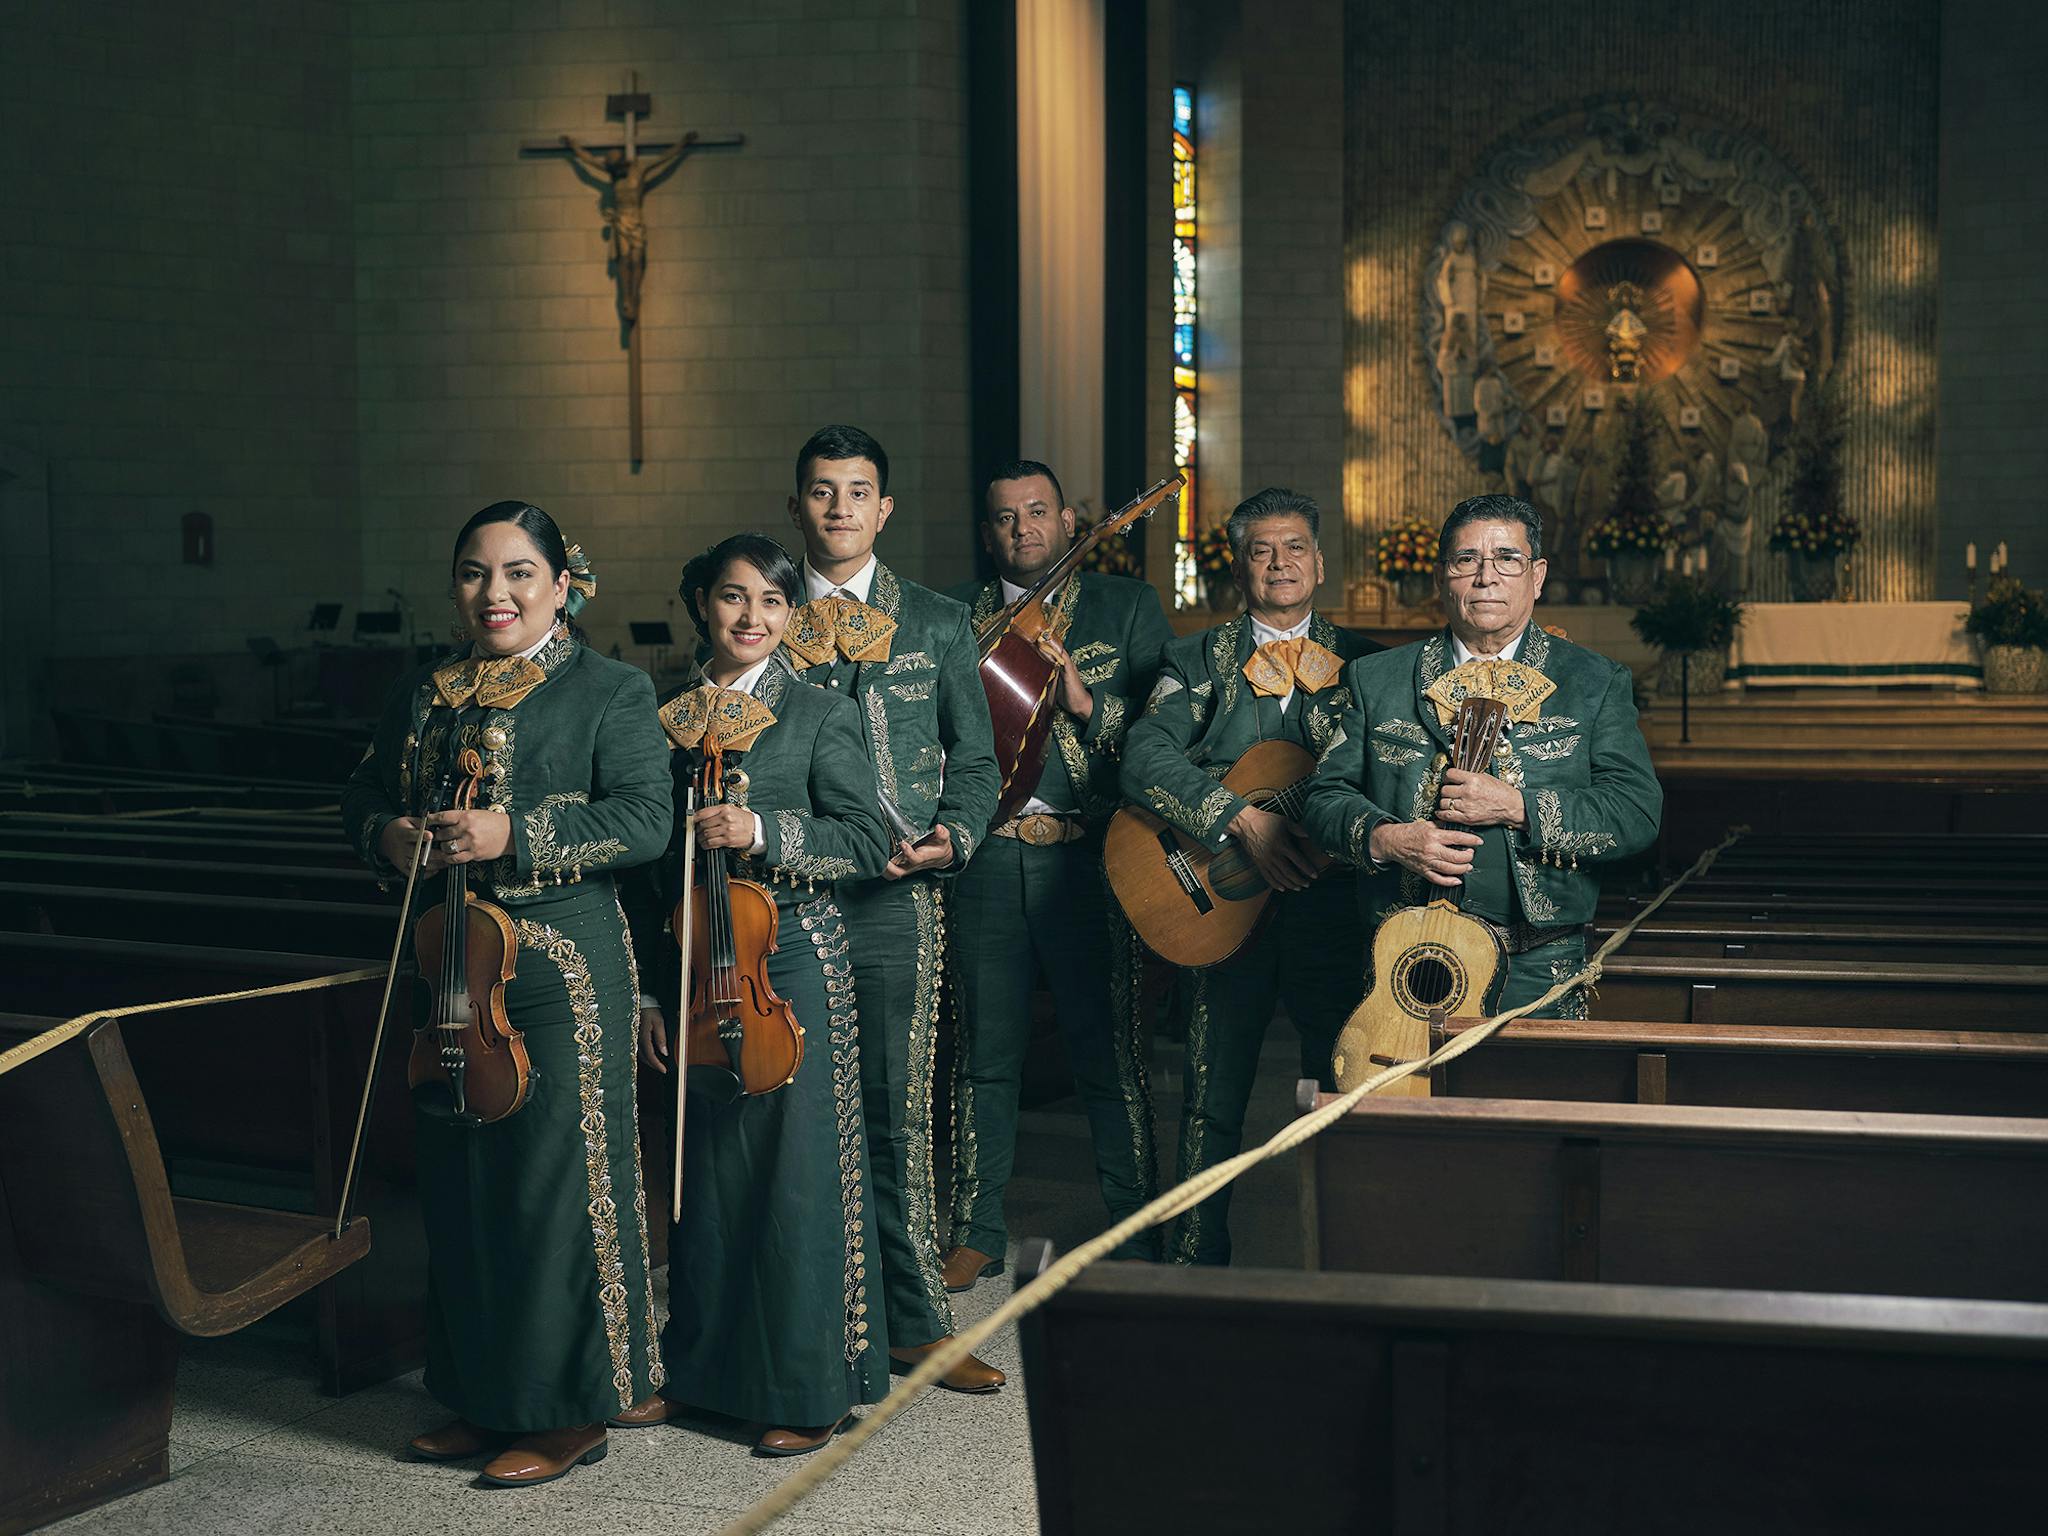 Mariachi choir members Cecilia Chavez, Ana Tirado, Victor Fortuna, Genero Fortuna, Francisco Morales, and Arturo Hernandez with their instruments at the Basilica of Our Lady of San Juan del Valle in San Juan on October 18, 2020.